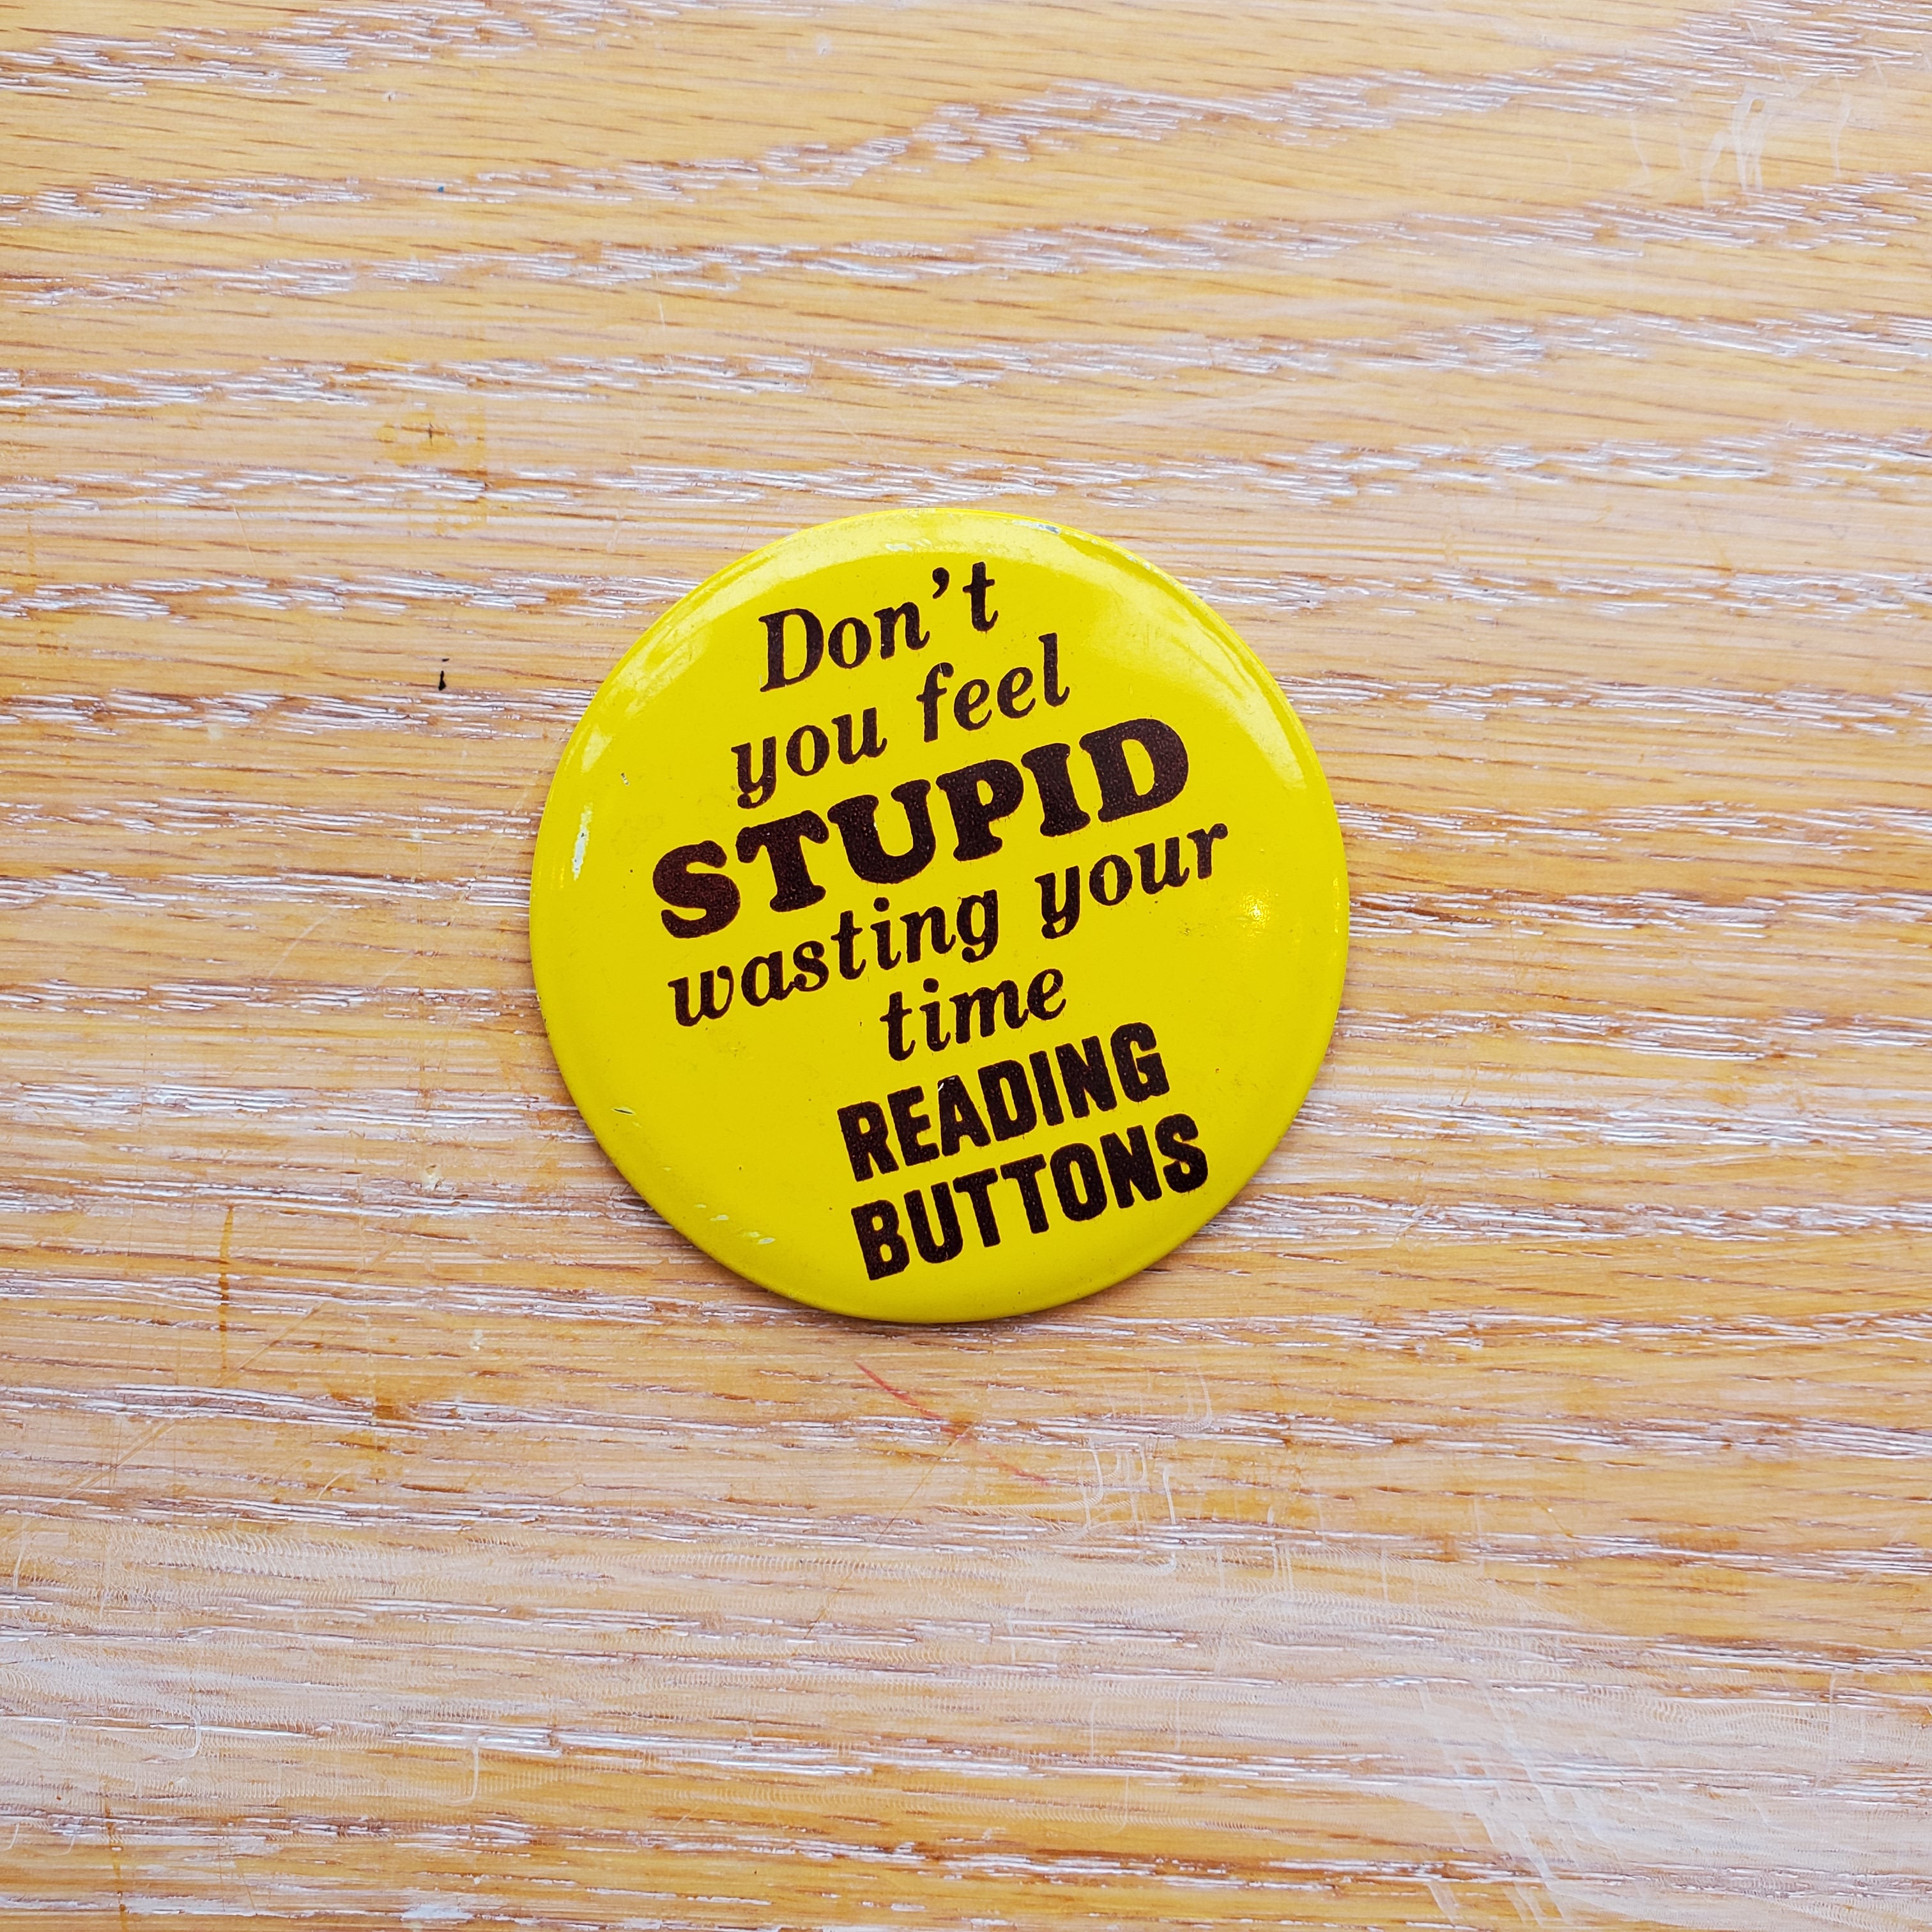 Reading Buttons Vintage Pinback Button